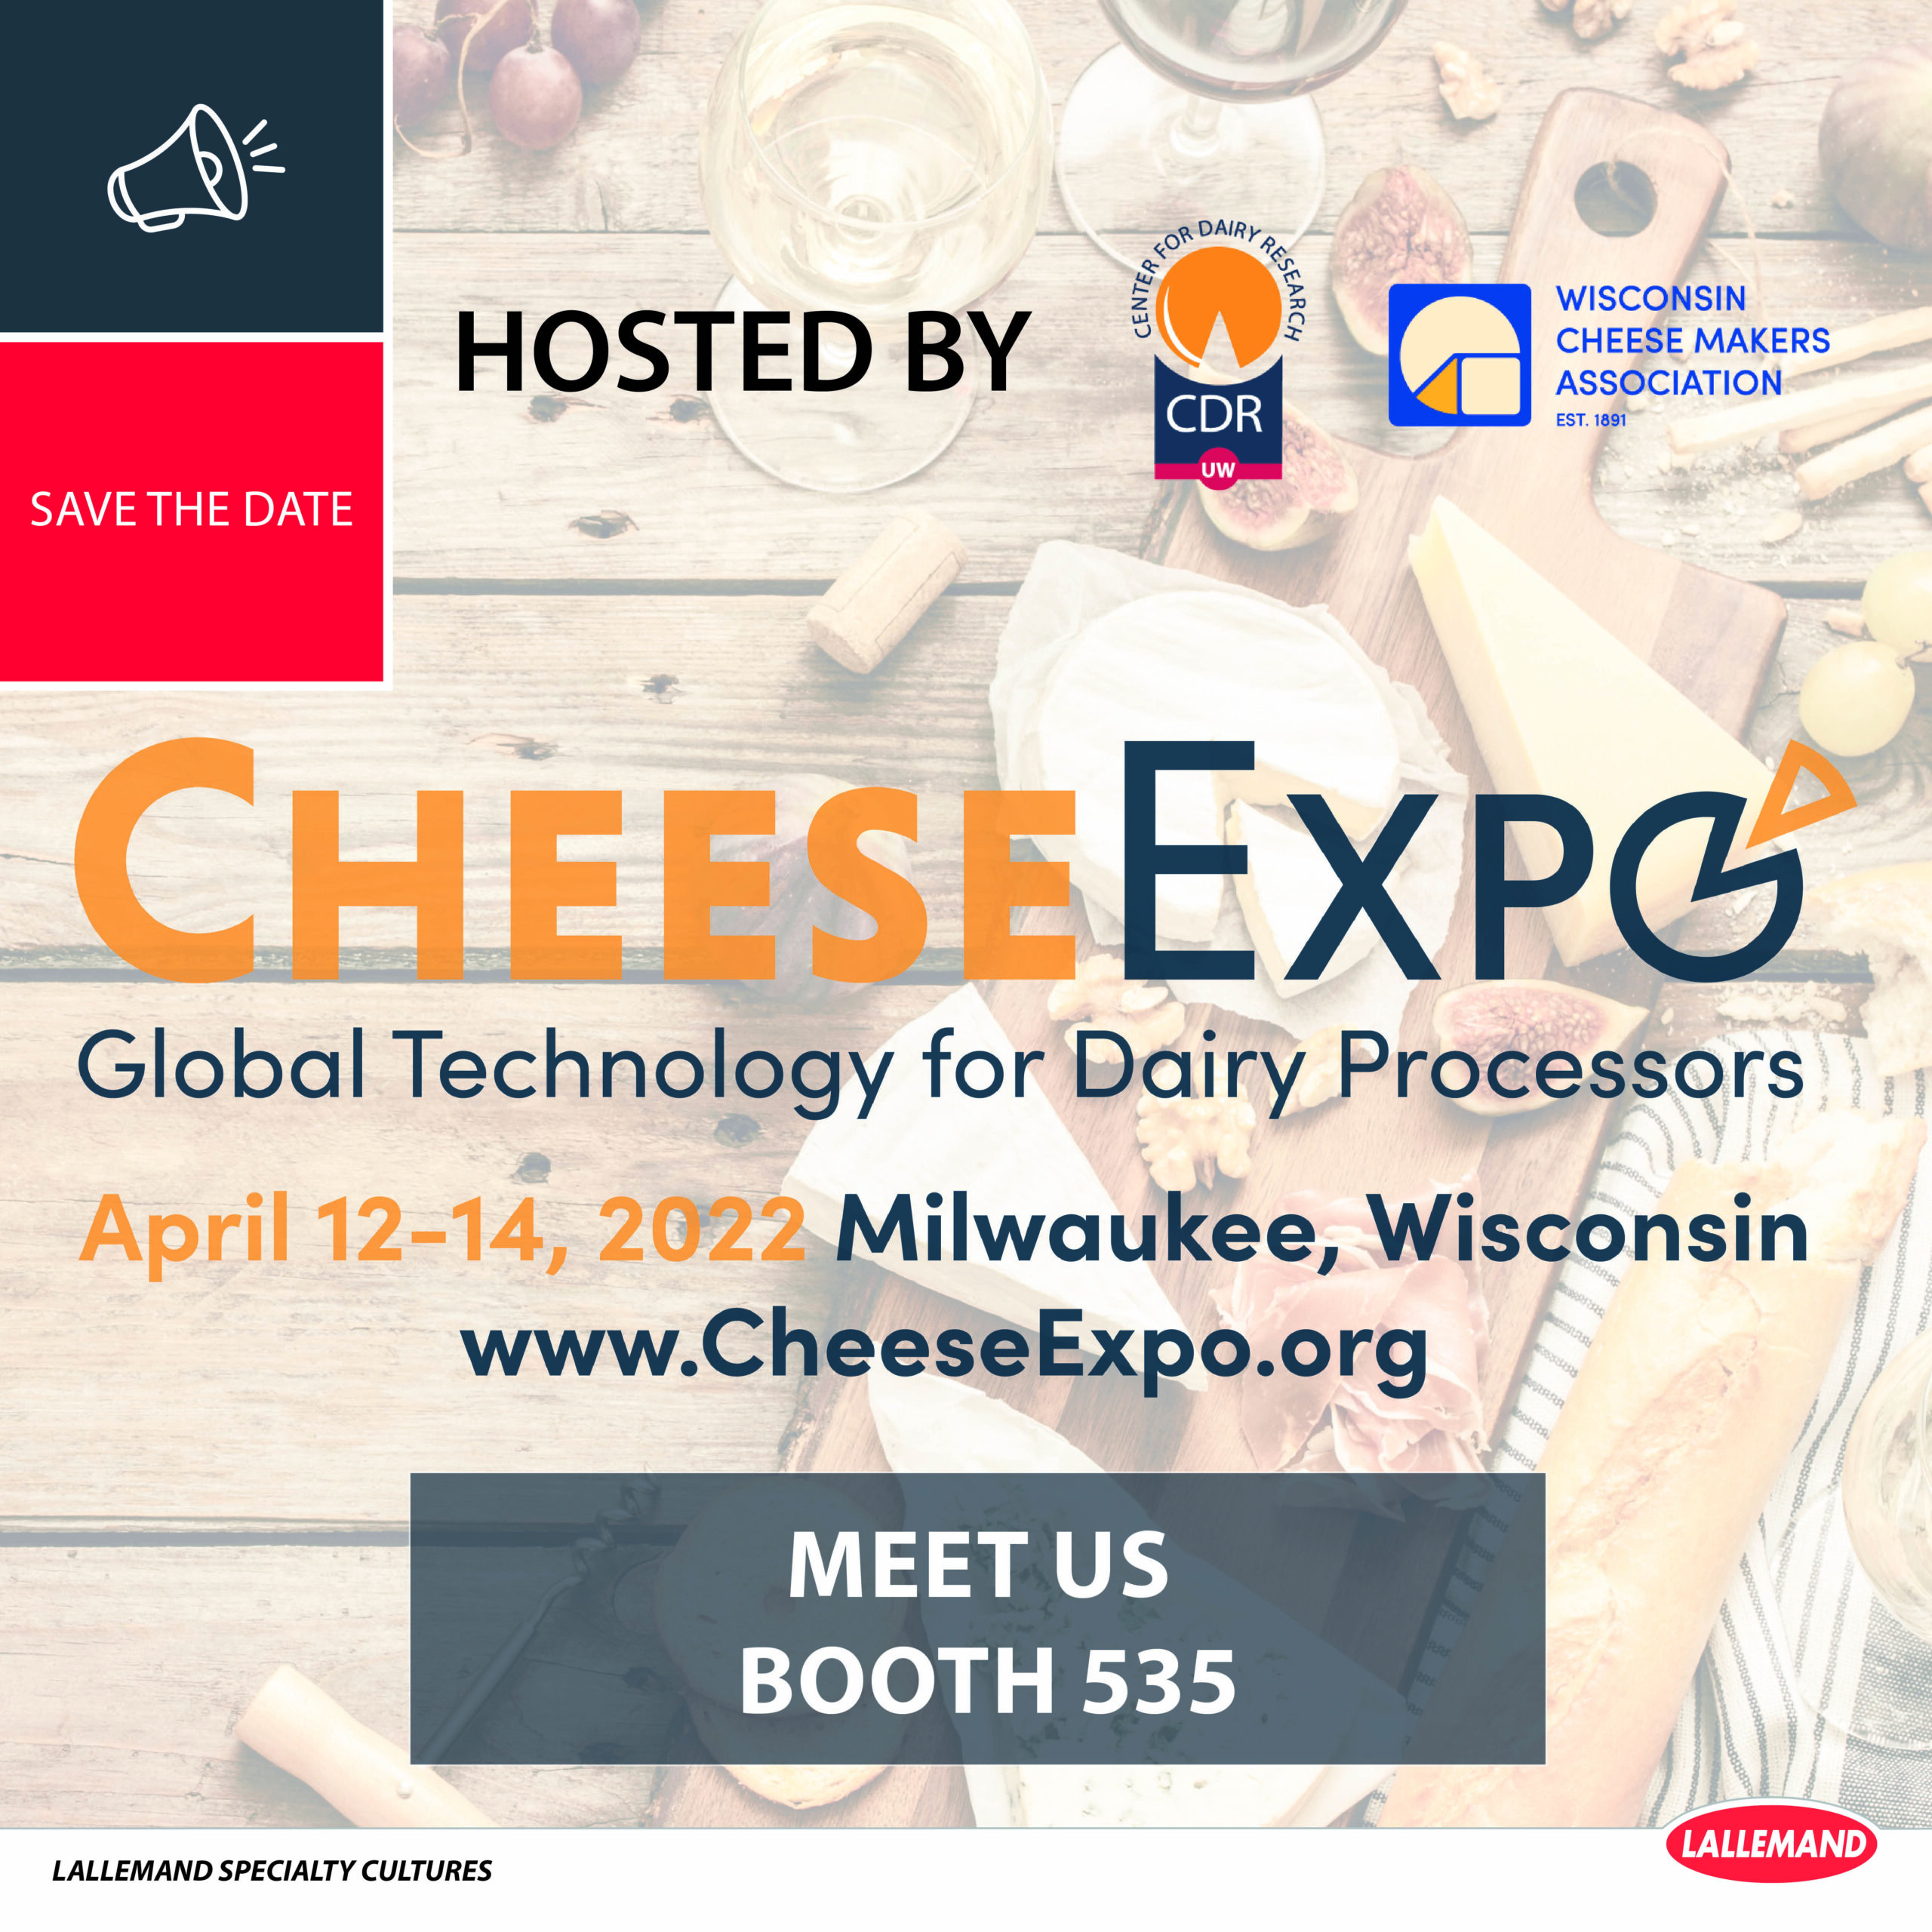 📢MEET THE TEAM, April 12-14 Booth #535 at Cheese Expo!